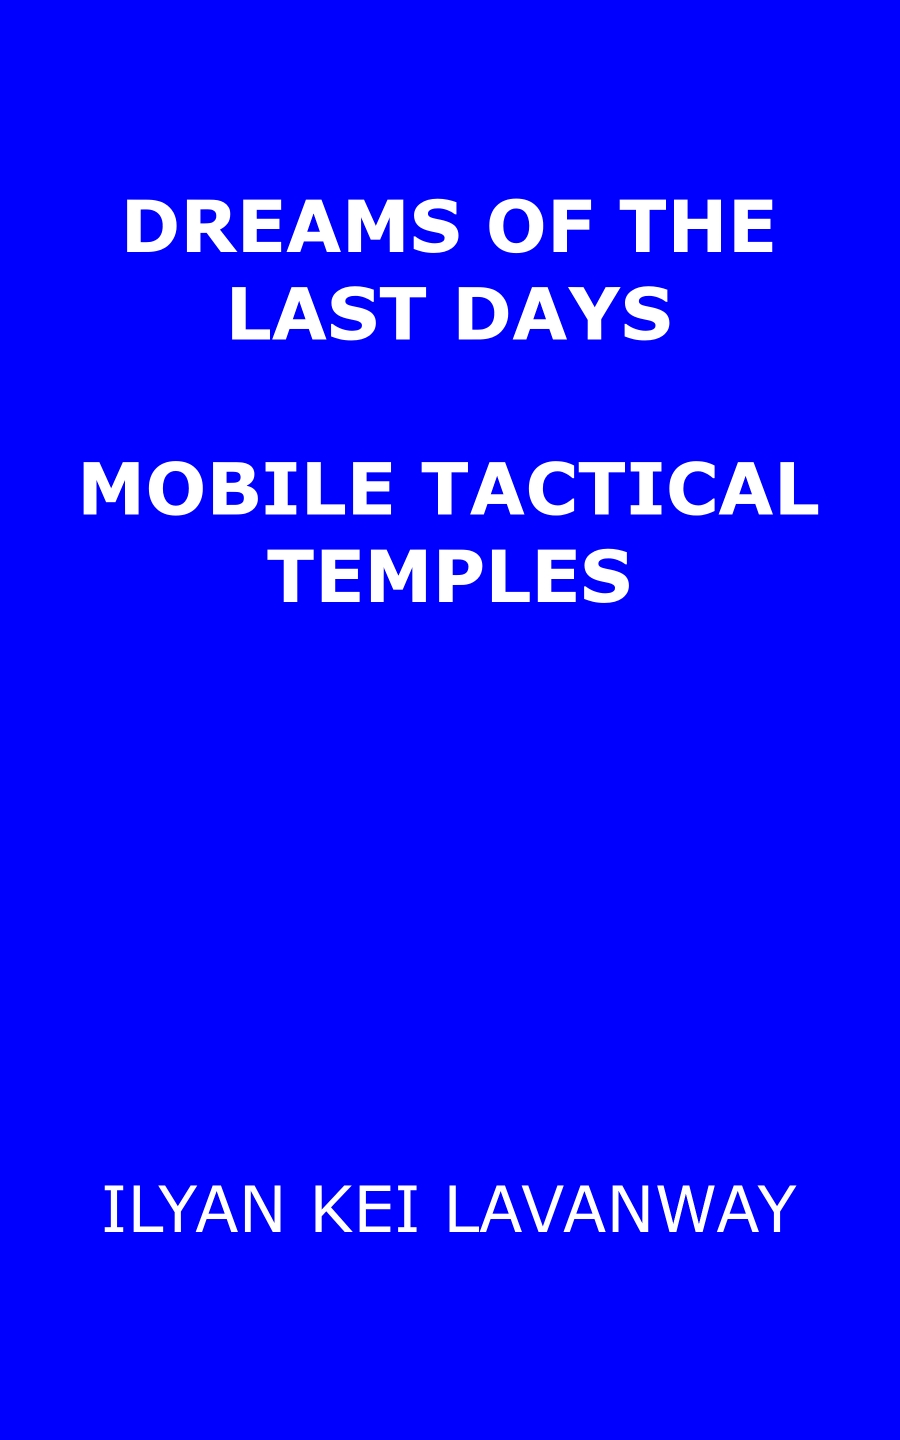 Dreams of the Last Days: Mobile Tactical Temples, available in Kindle and all formats at Smashwords